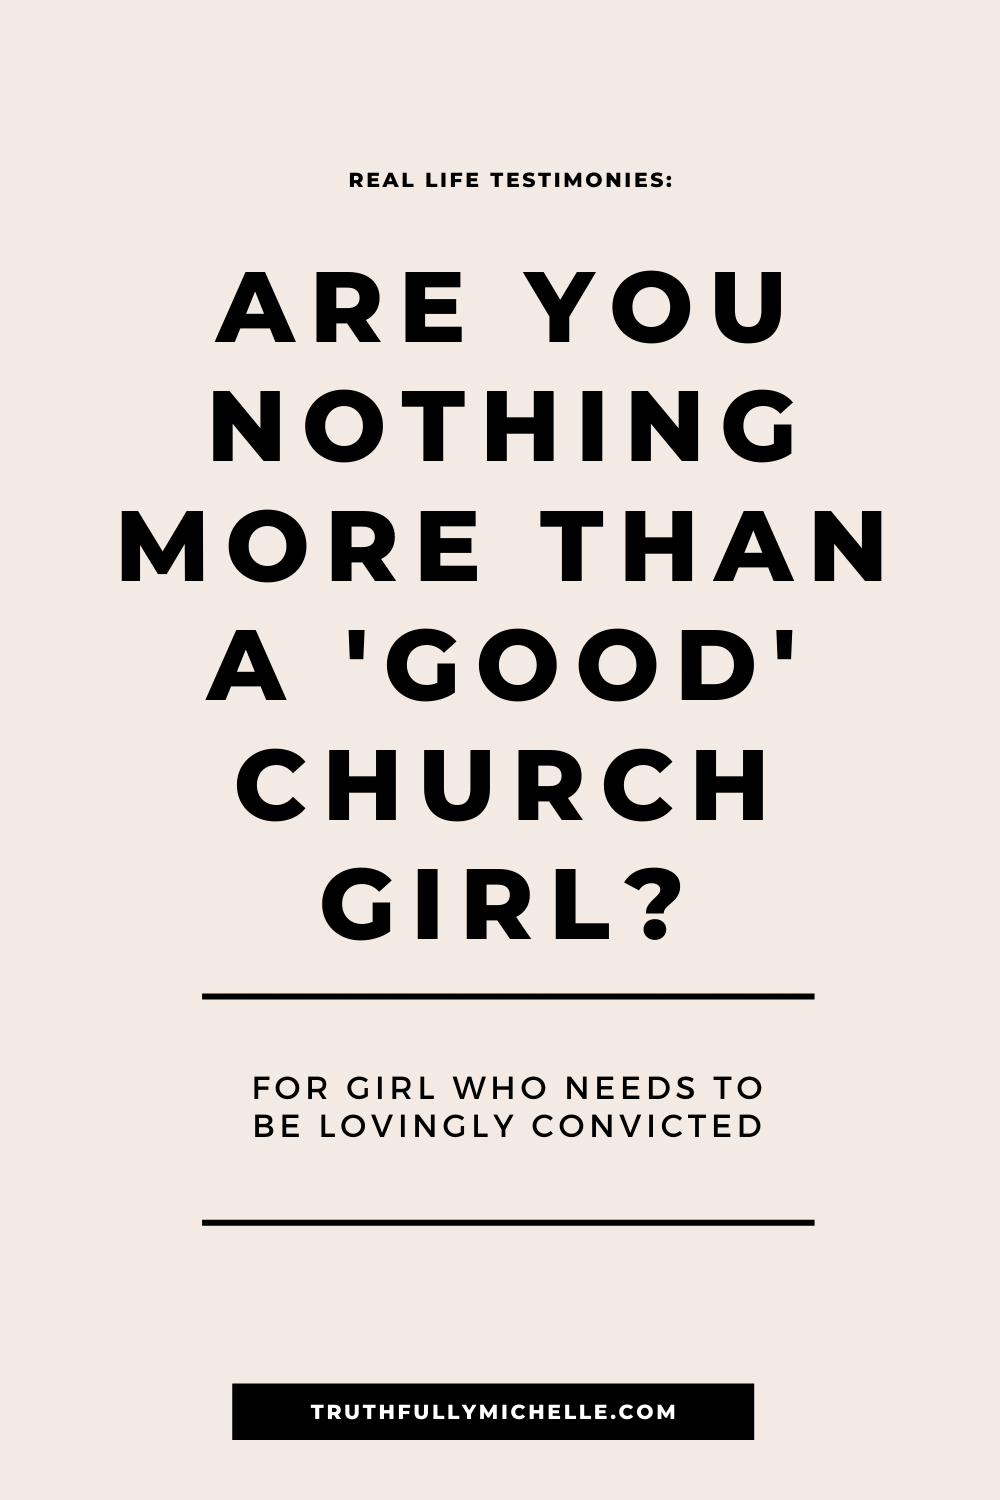 how to be a good christian girl, good church girl, good christian girl, good girls go to church, good girls never miss church, good girls always go to church, lukewarm christian truths, lukewarm christianity, don't be a lukewarm christian, christian testimonies, christian testimony true stories, christian testimony examples